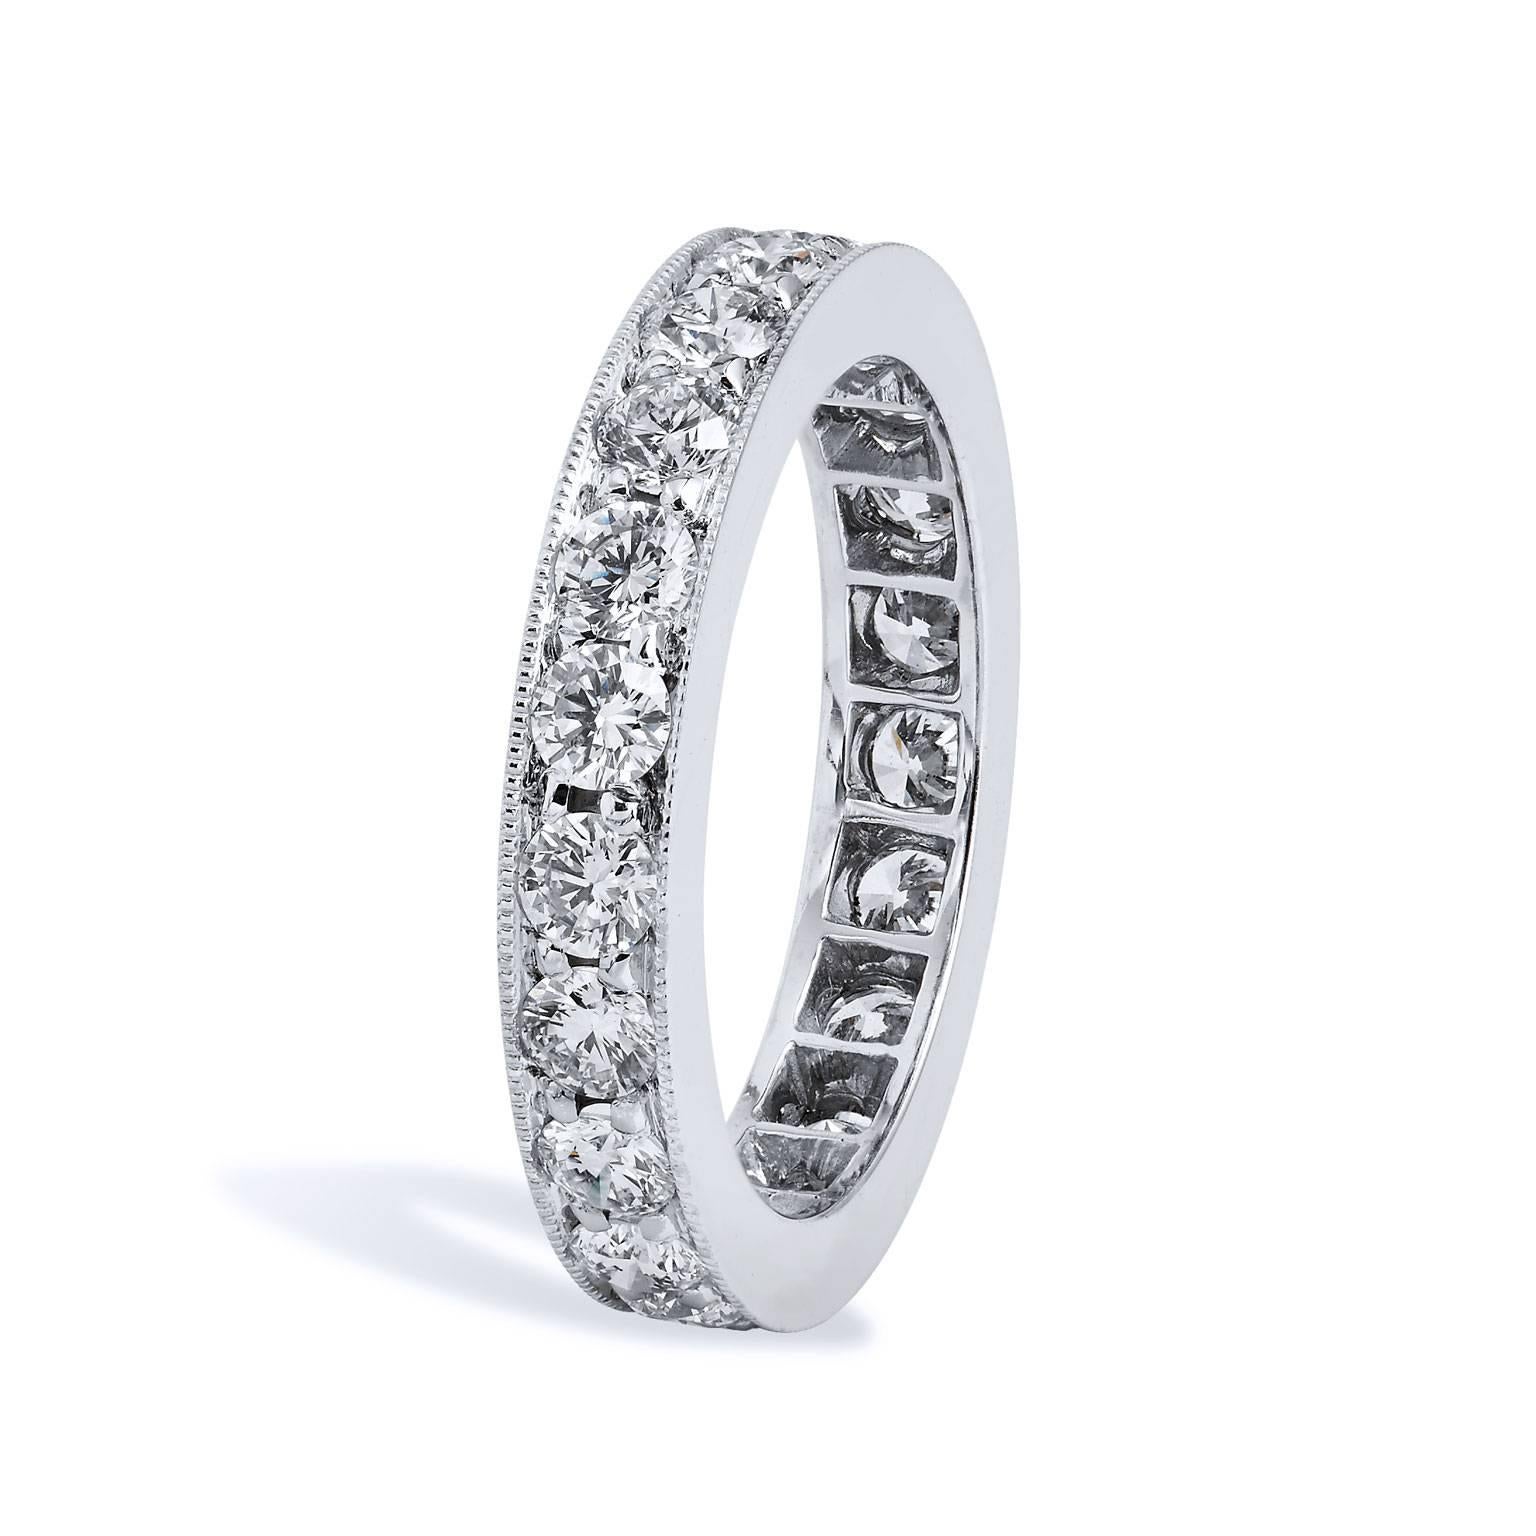 This handmade diamond band ring features twenty-one pieces of diamond pave set with a total weight of 1.70 carat (D/E/F/VS1). Affixed to a 3.60 millimeter 18 karat white gold band with milgrain work opens the eye, and allow the ring to pop with